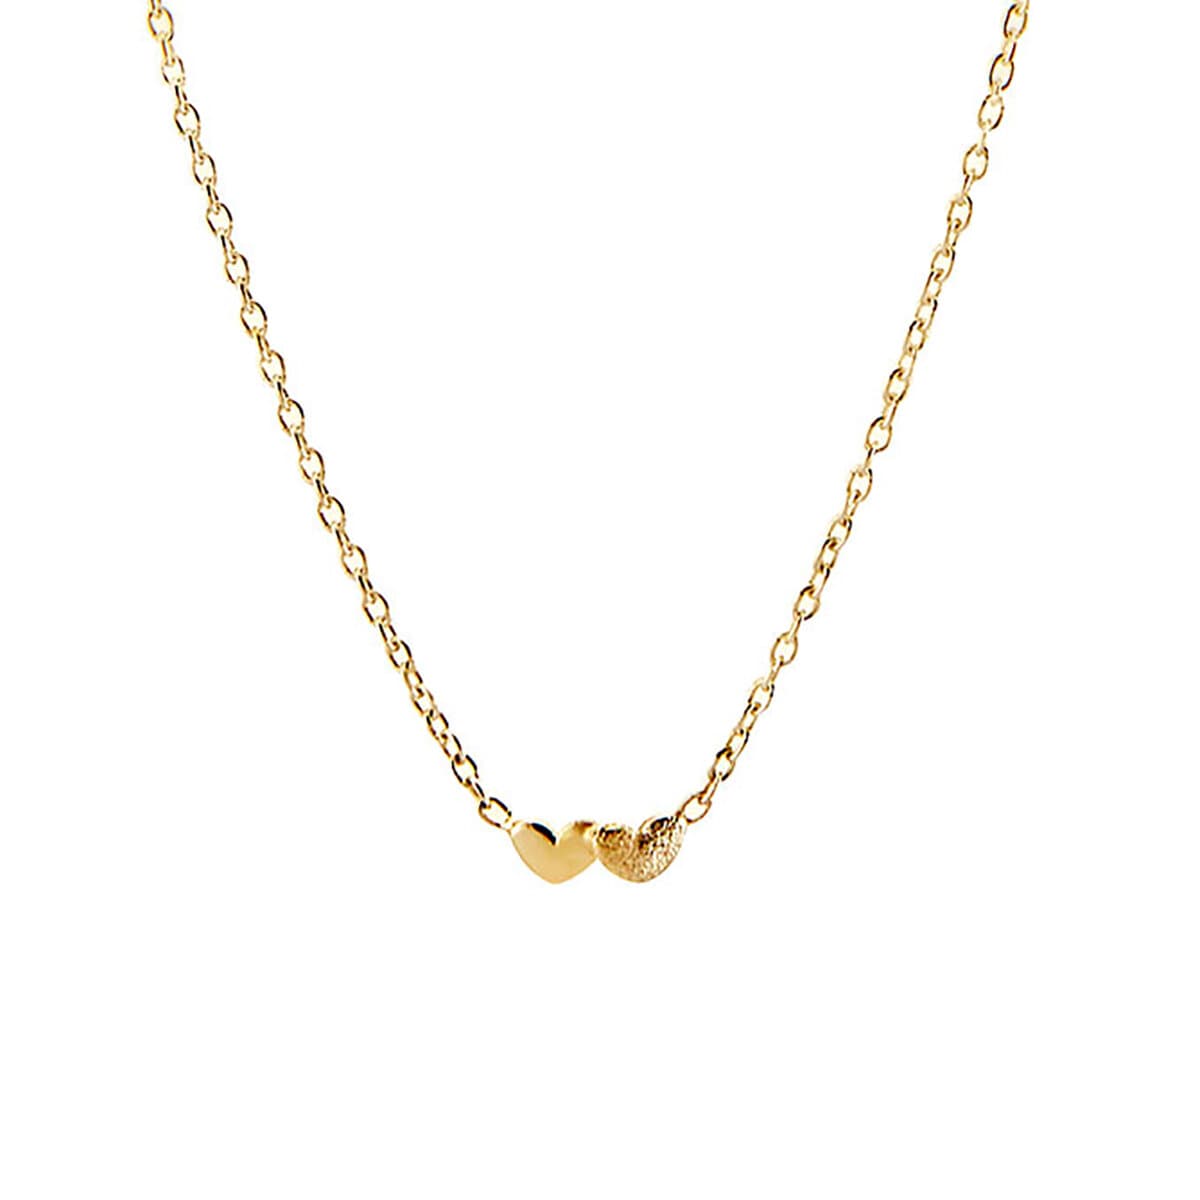 Loving heart necklace gold